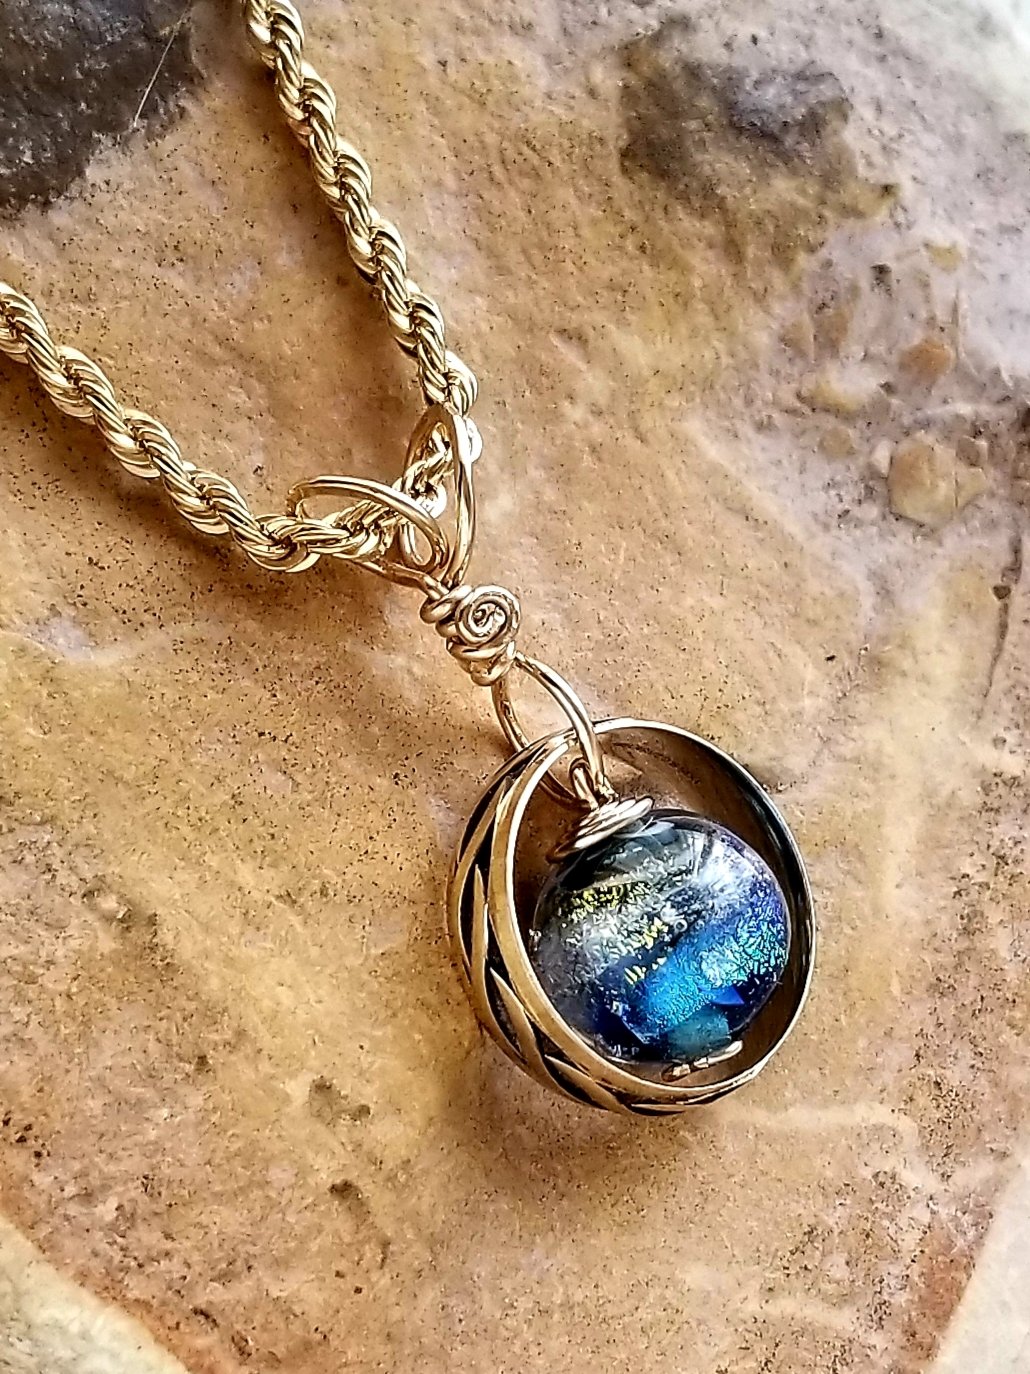 Mountain Heritage Jewelry Repair - 4 Generations of Jewelry Custom Made Into  a Pendant - Grandfather, Grandmother's Wedding Bands, Mother's Engagement  Ring Diamond, Granddaughter's Baby Ring | Facebook